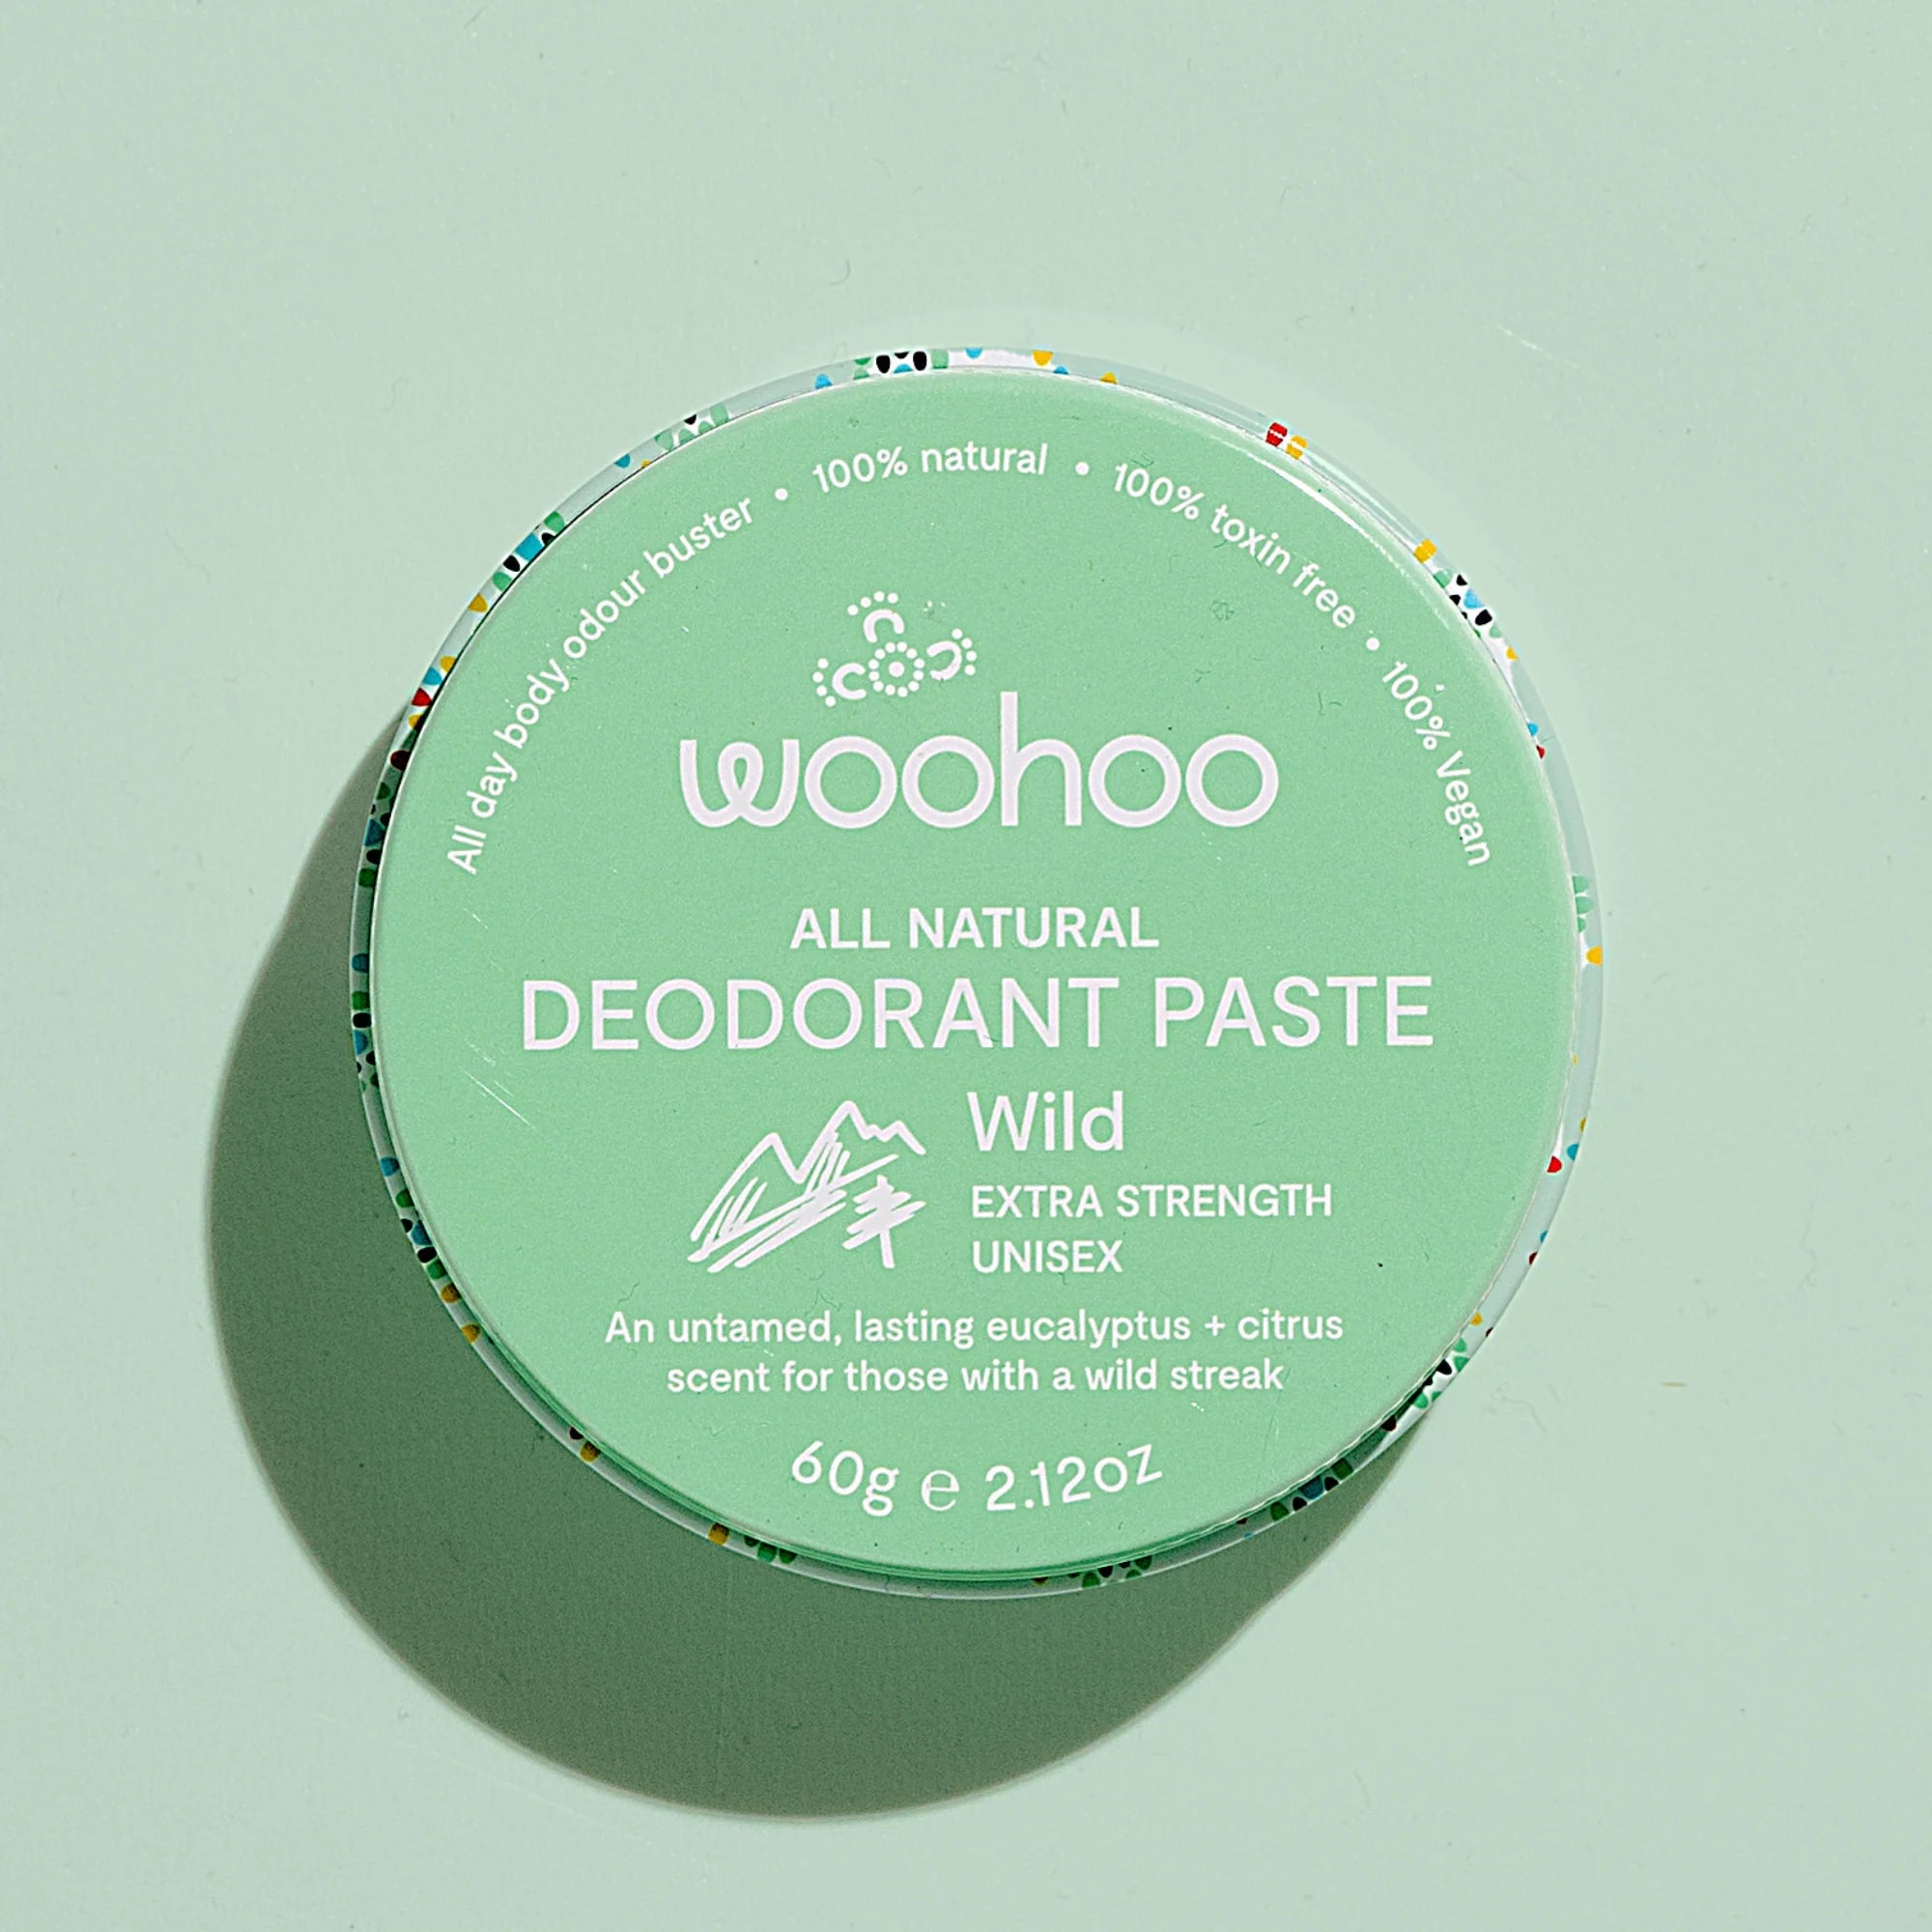 Image of the Woohoo Wild Natural Deodorant Paste tin on a light green background